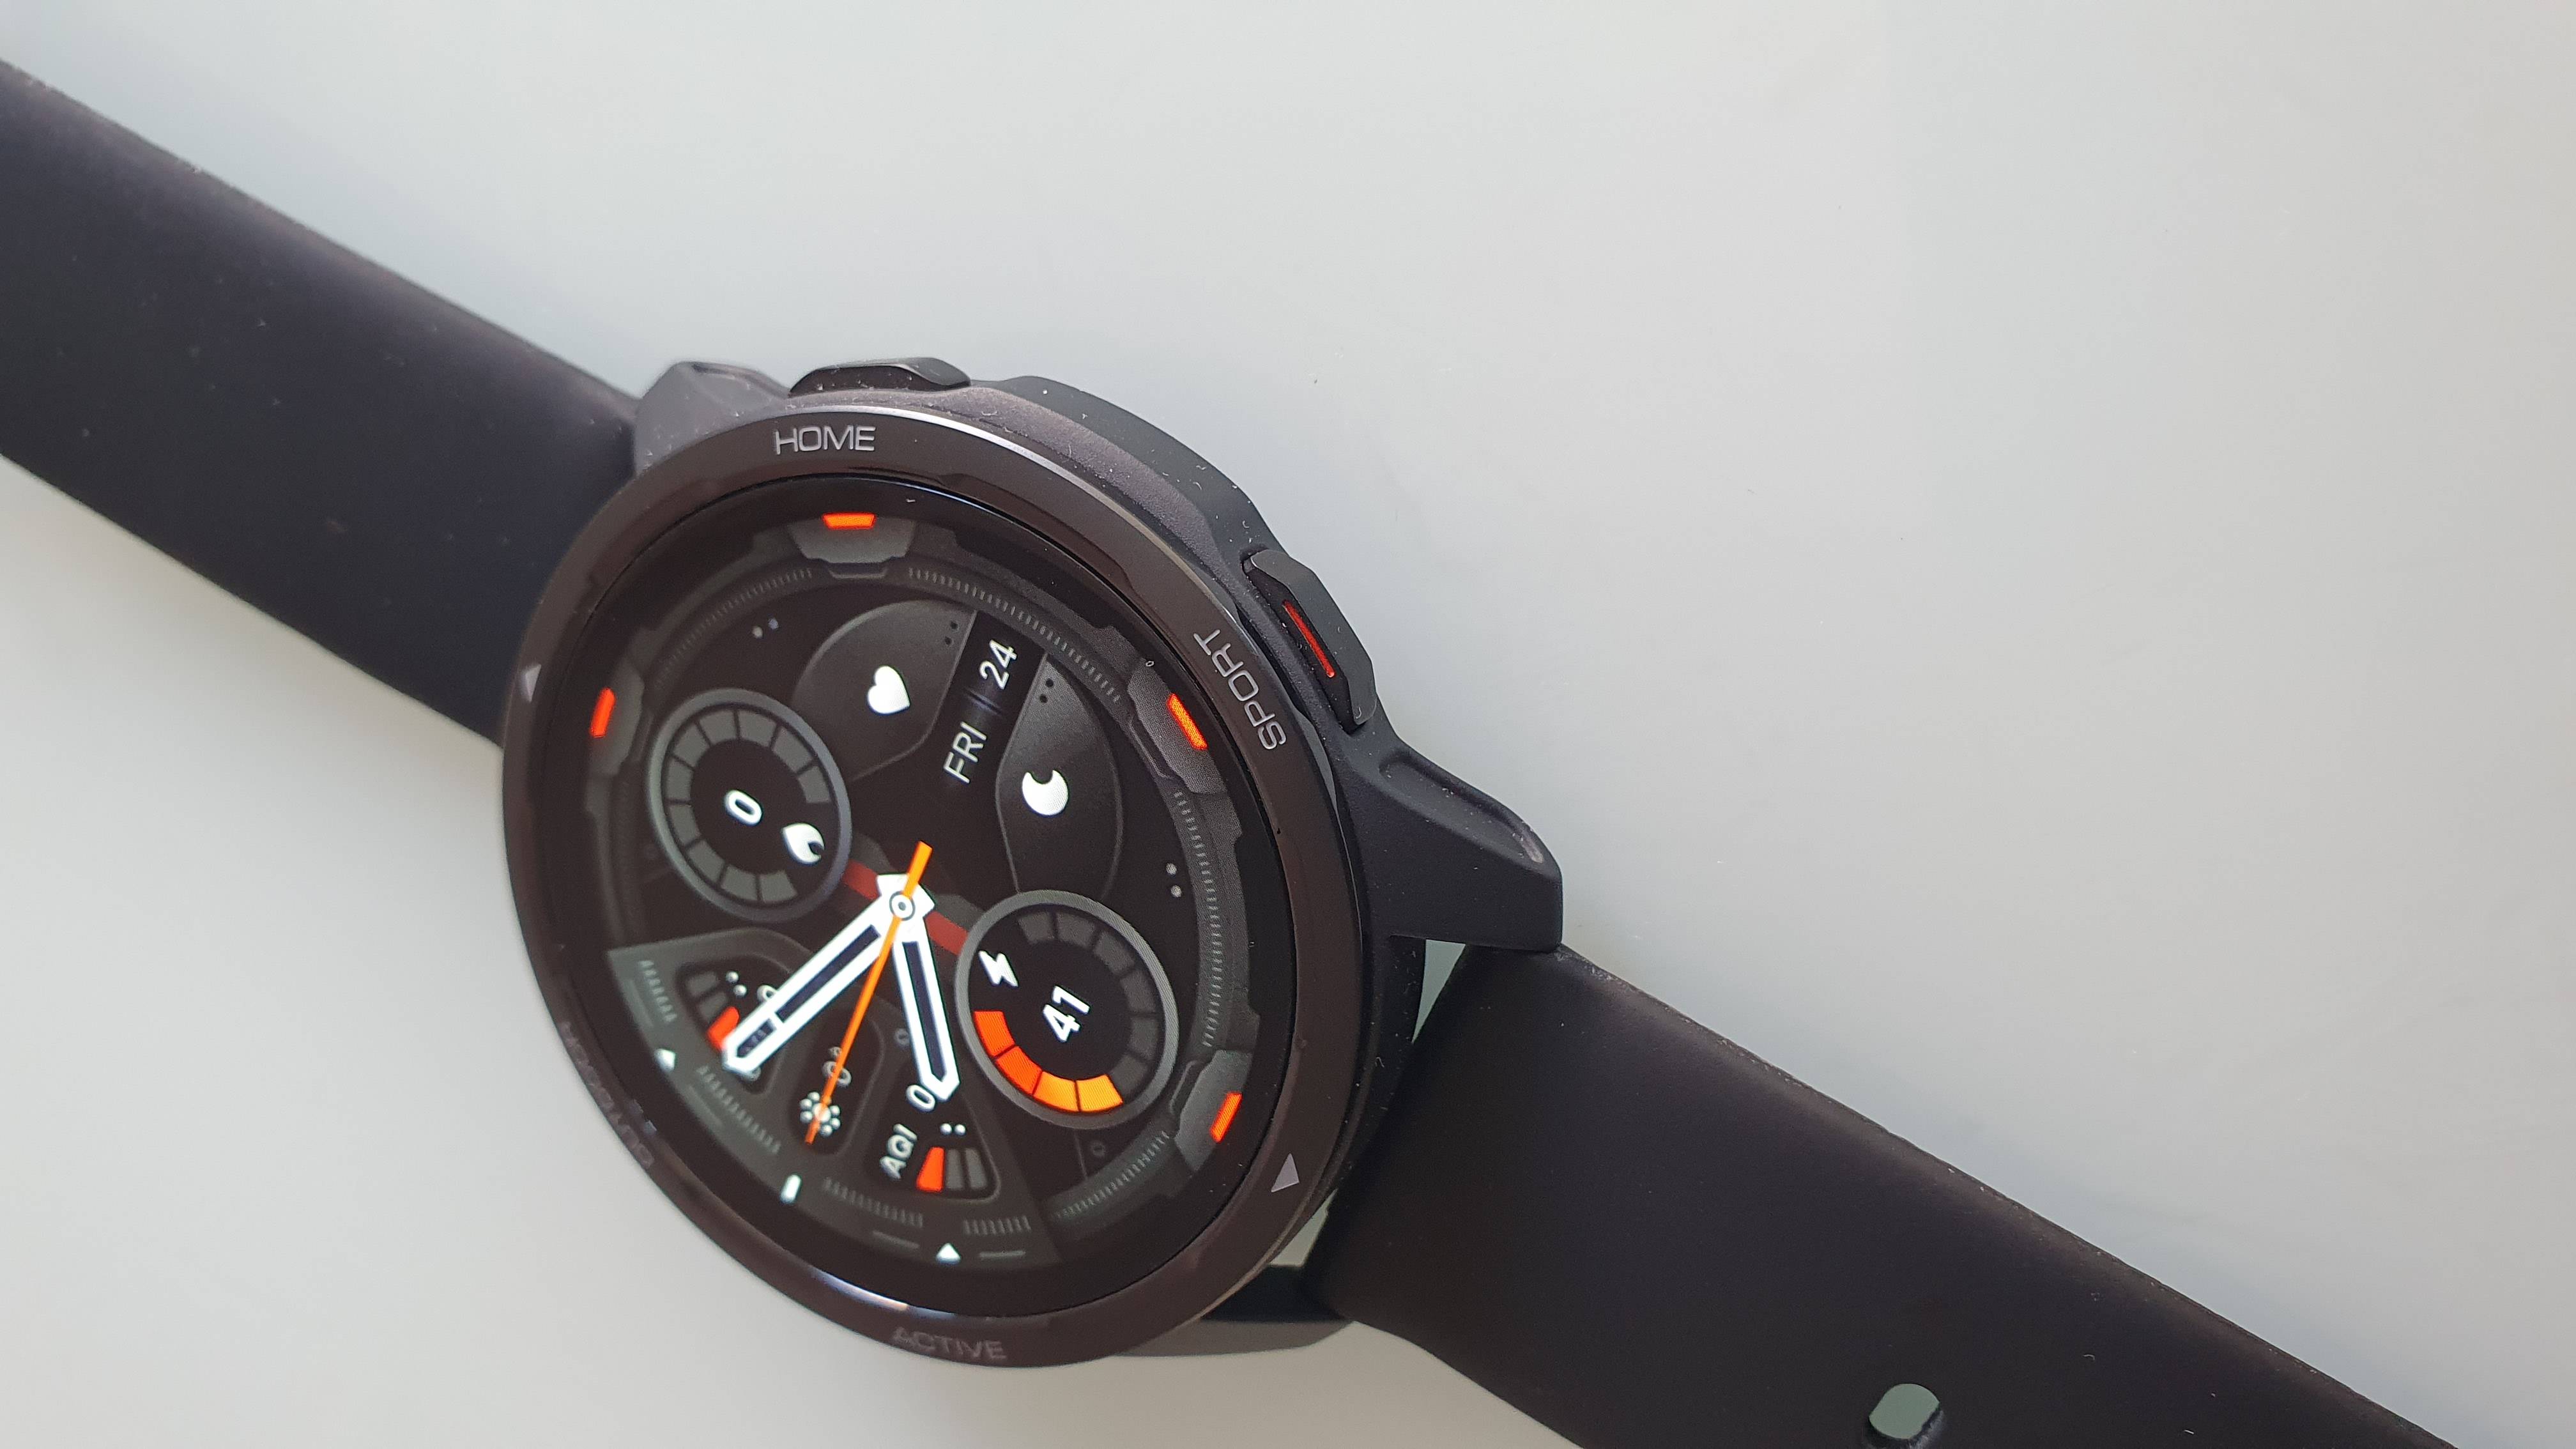 Xiaomi watch s1 Active. Xiaomi watch s1 Active циферблаты. Циферблаты Xiaomi watch s1 Pro gl. Xiaomi watch s1 Active циферблат фаллаут. Watch active 1